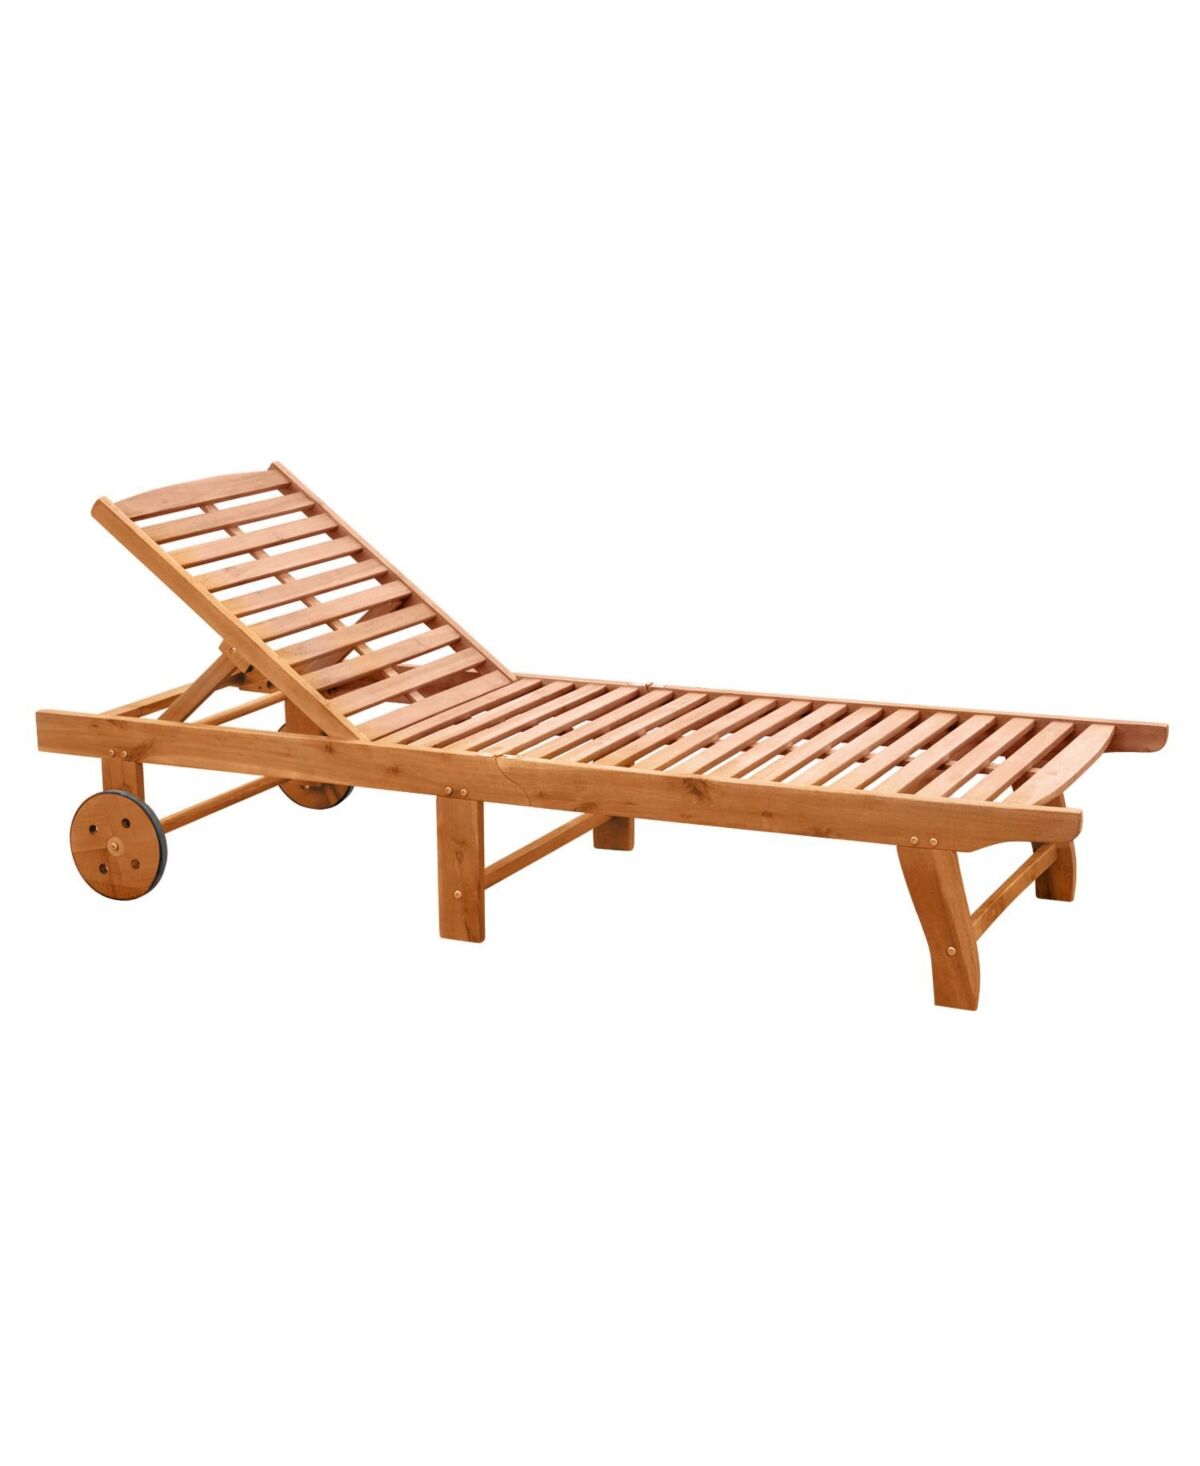 Outsunny Outdoor Folding Chaise Lounge Chair Recliner with Wheels, Acacia Wood Frame - Teak Color - Teak